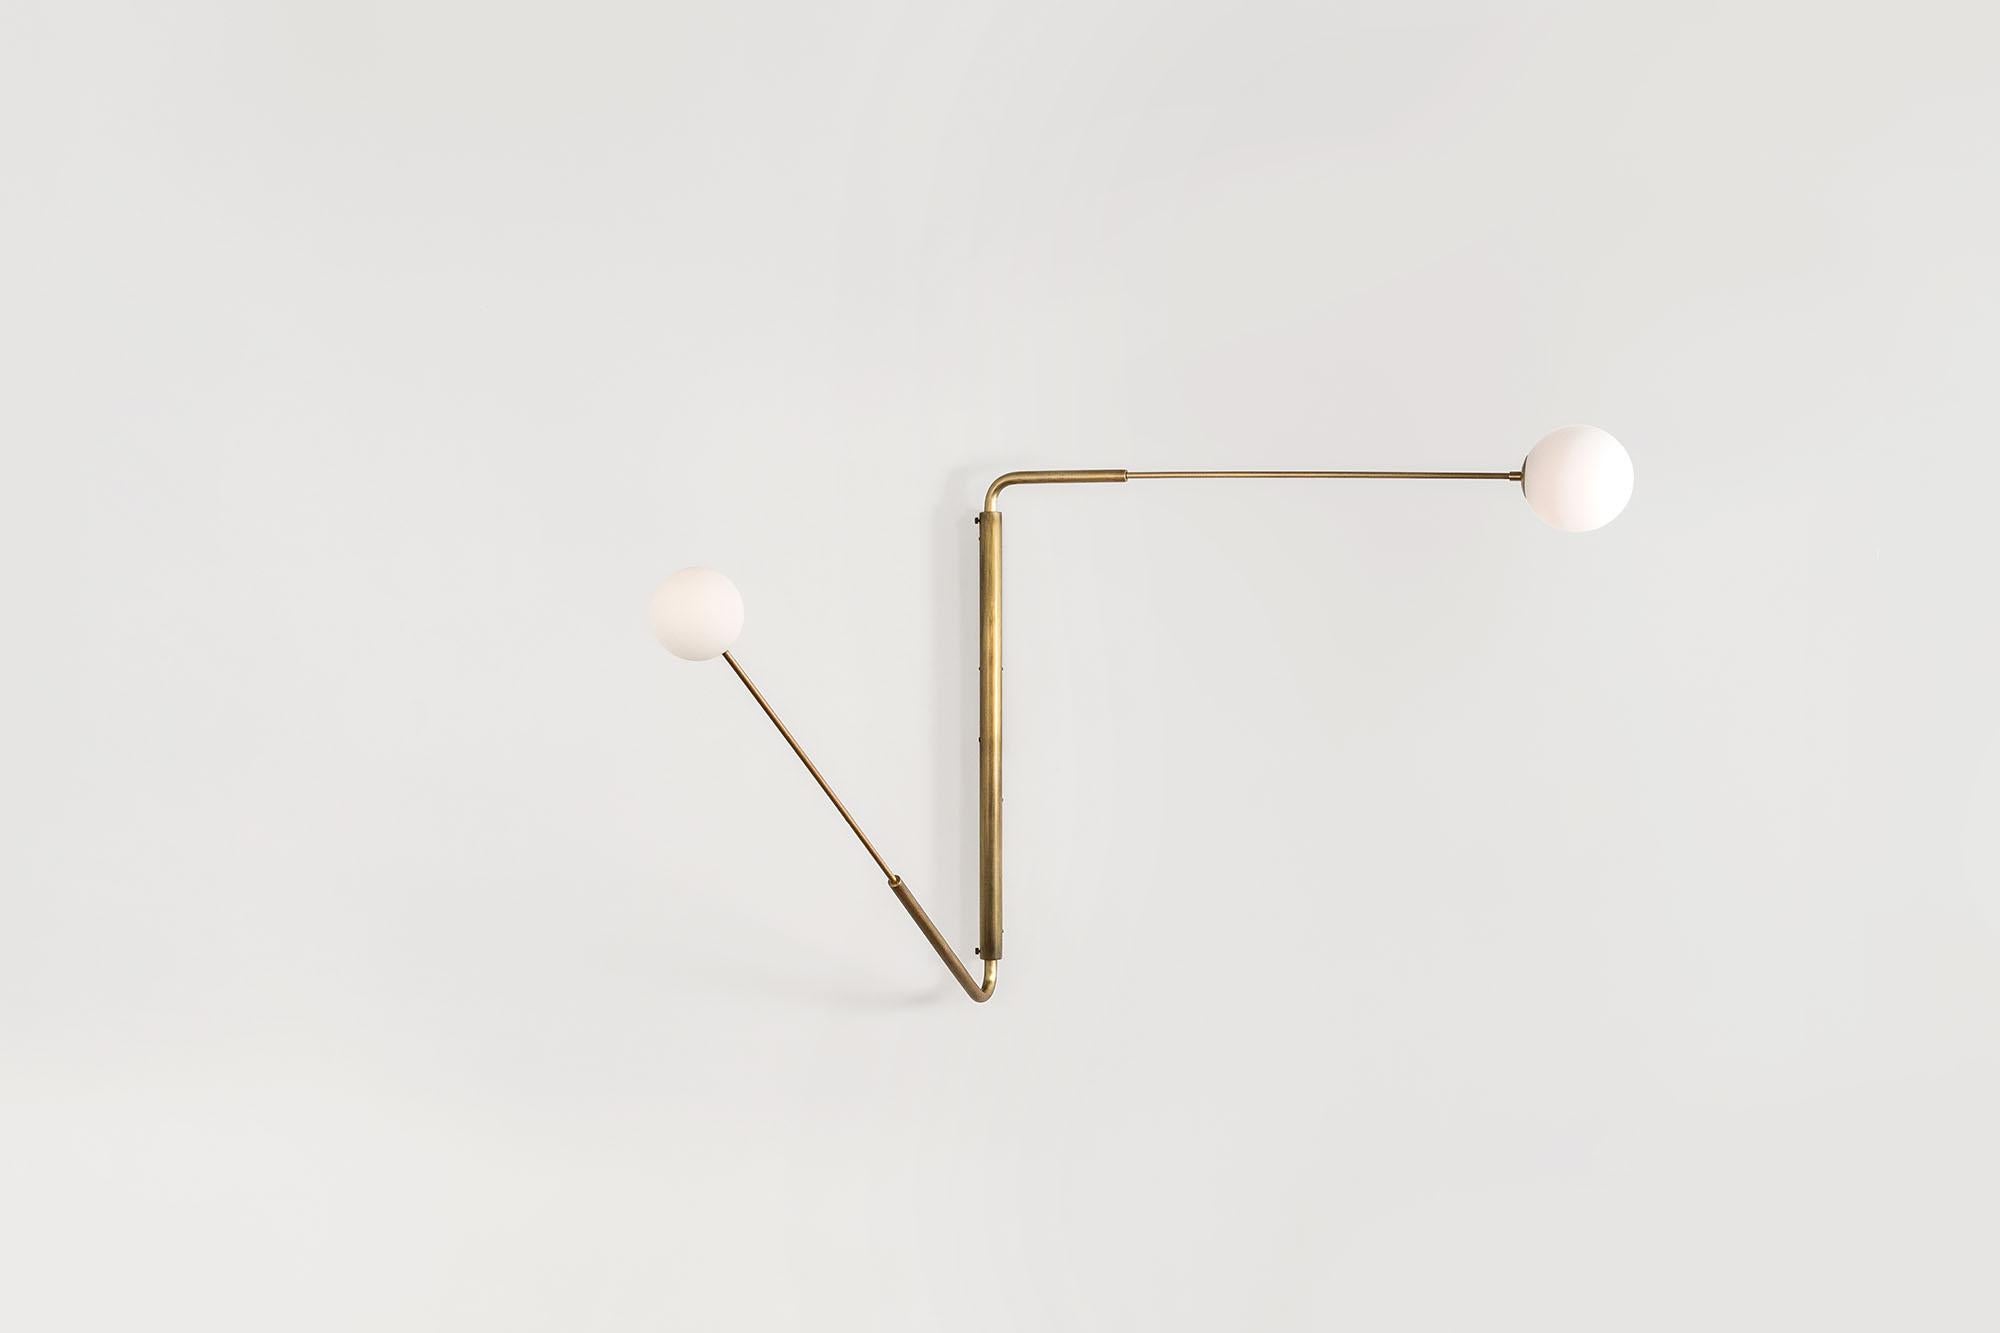 Contemporary Aged Brass Swing Arm Wall Sconce, Flutter One by Paul Matter

The long rotating arms are attached to a vertical, wall-mounted spine that results in a Minimalist yet oversized fixture. Flutter comes in three variations, each with two